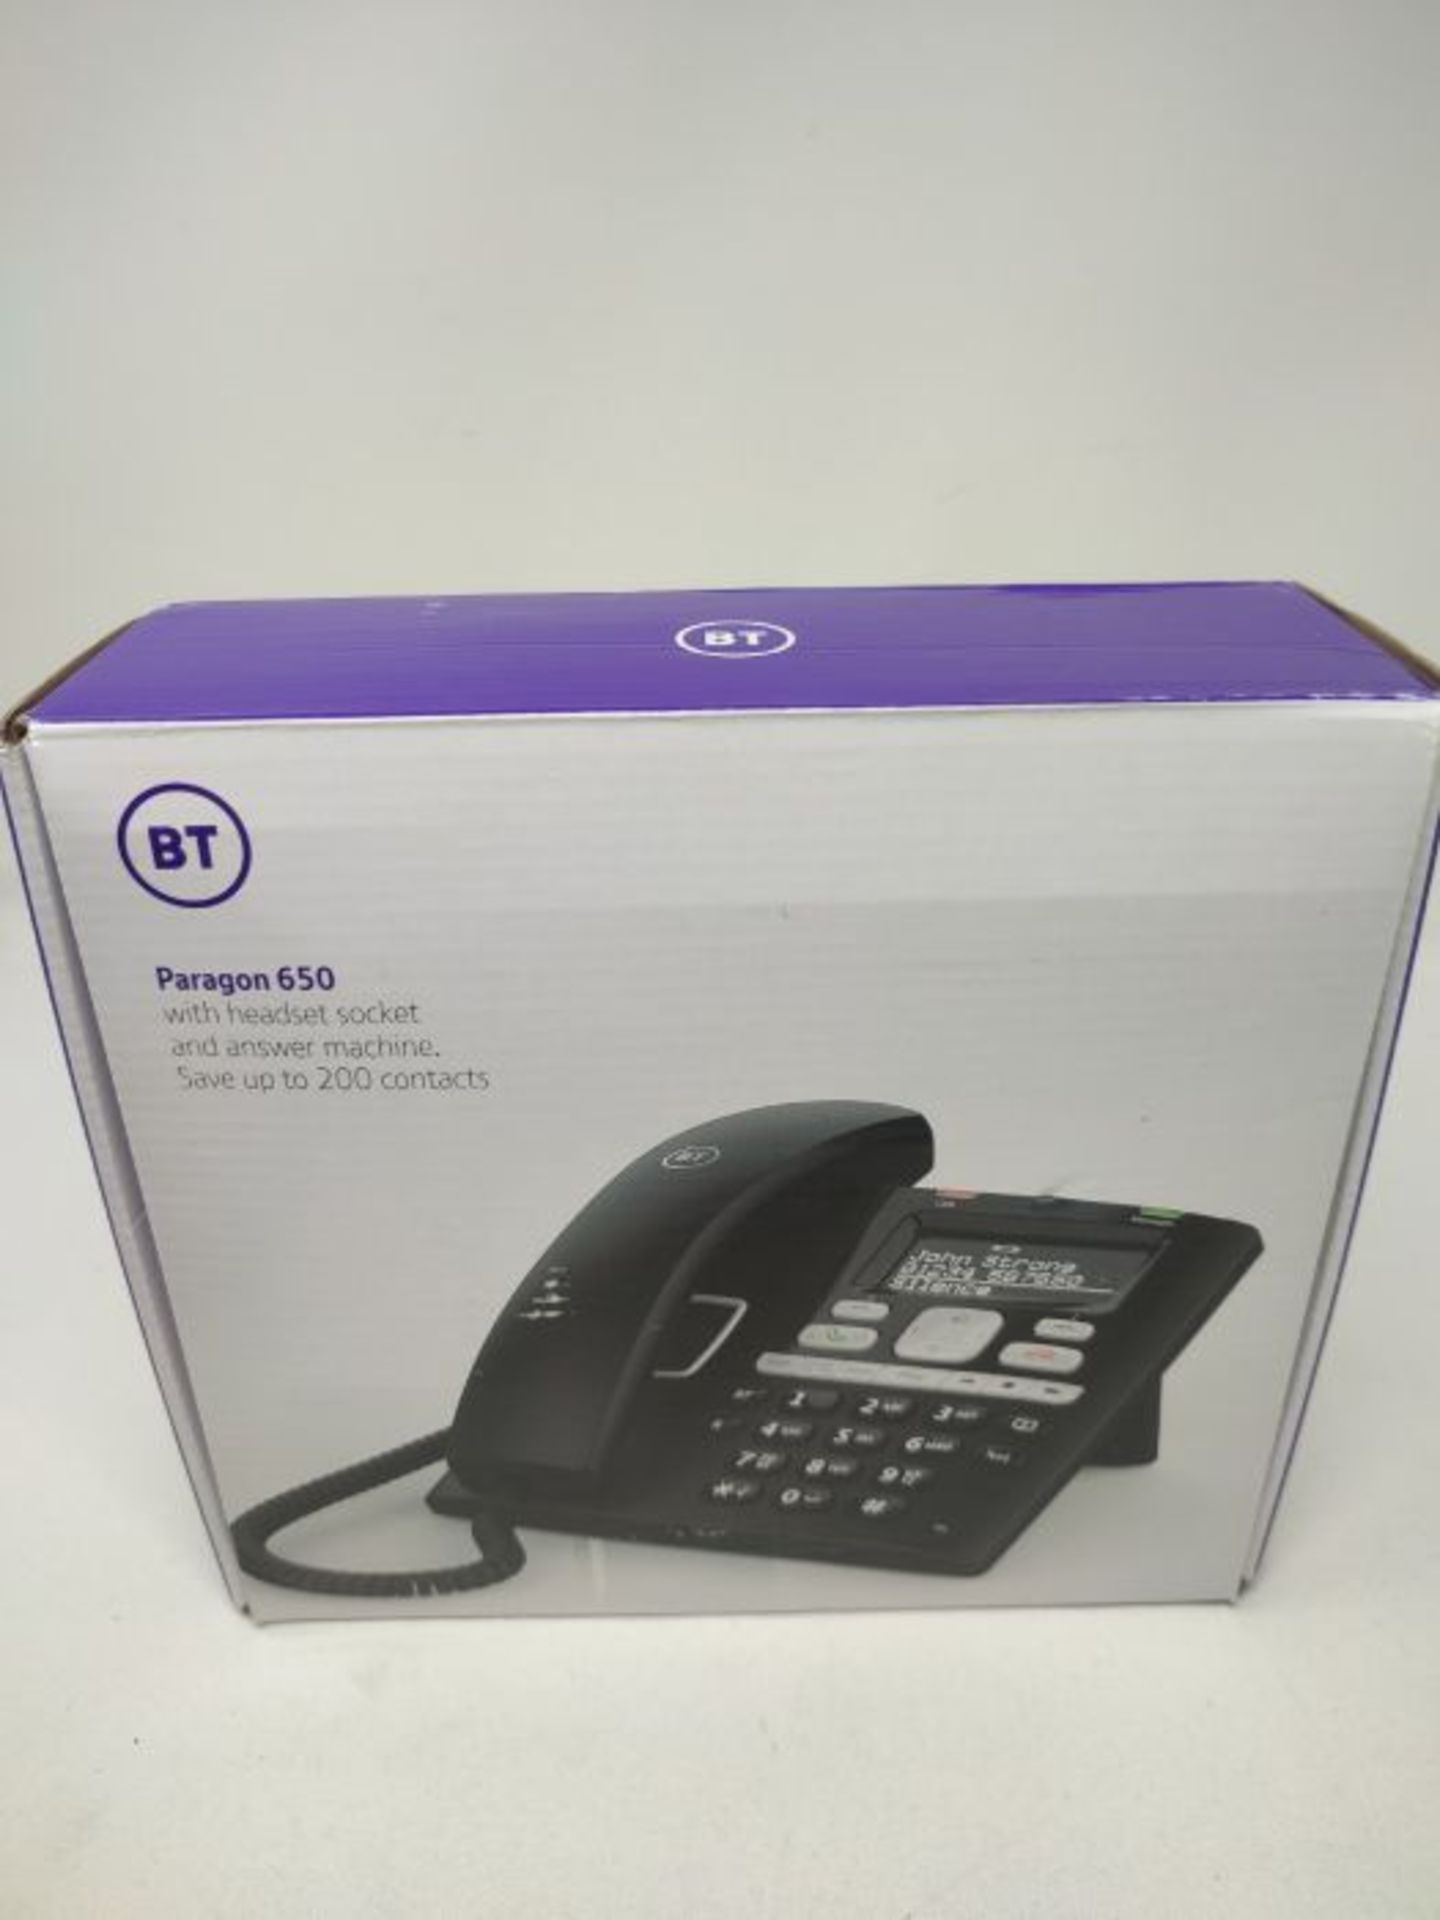 RRP ?60.00 BT Paragon 650 Telephone Corded Answer Machine 200 Memories SMS Caller Inverse Display - Image 2 of 3